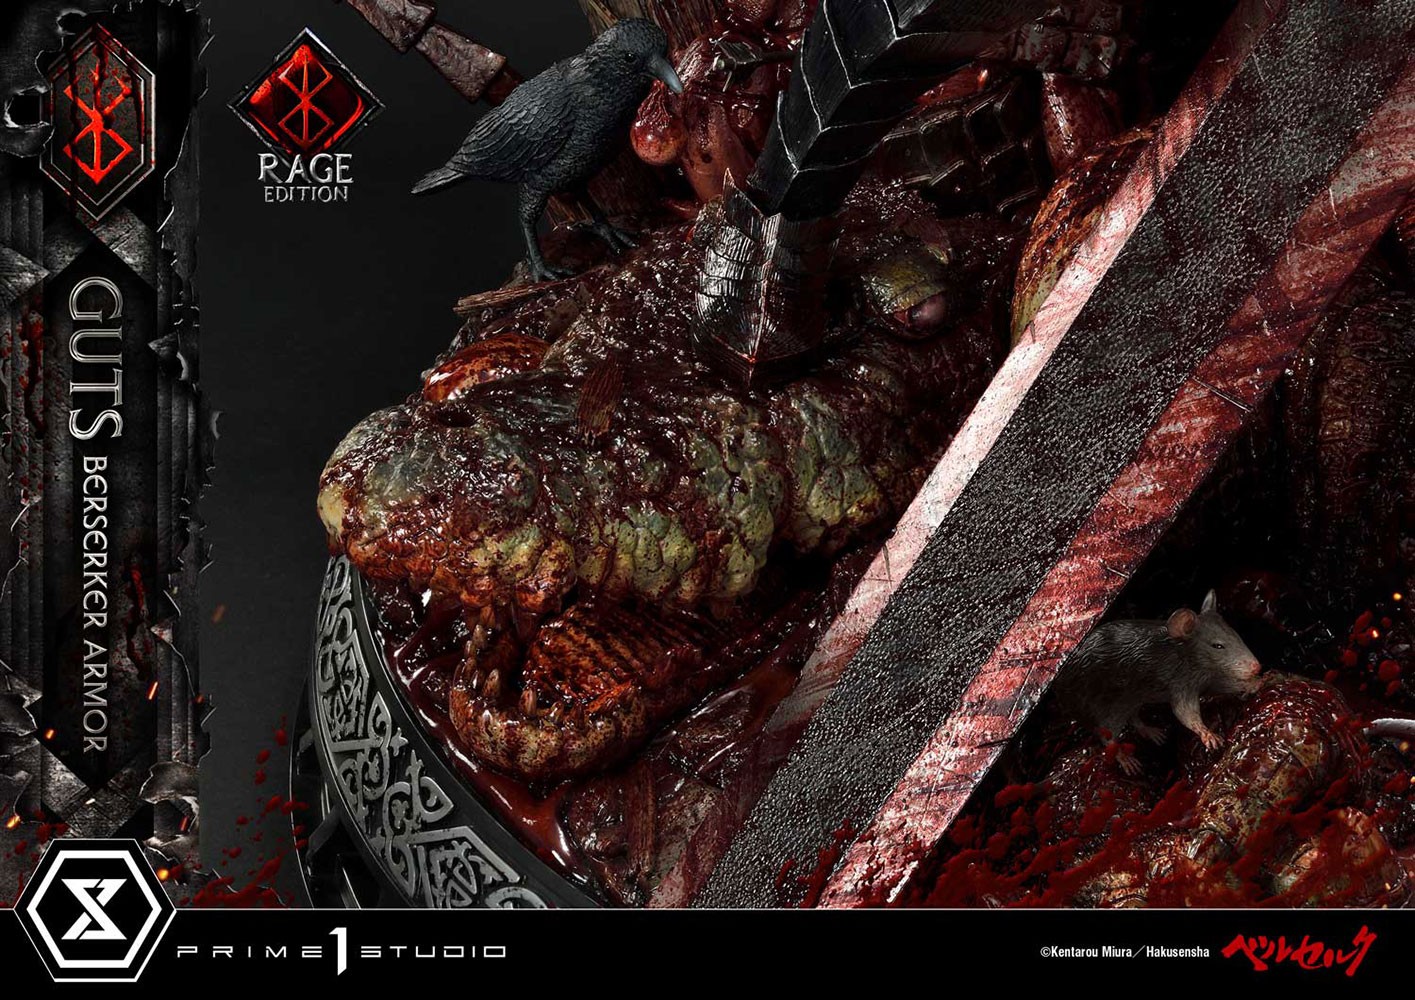 Guts Berserker Armor (Rage Edition) Collector Edition (Prototype Shown) View 17